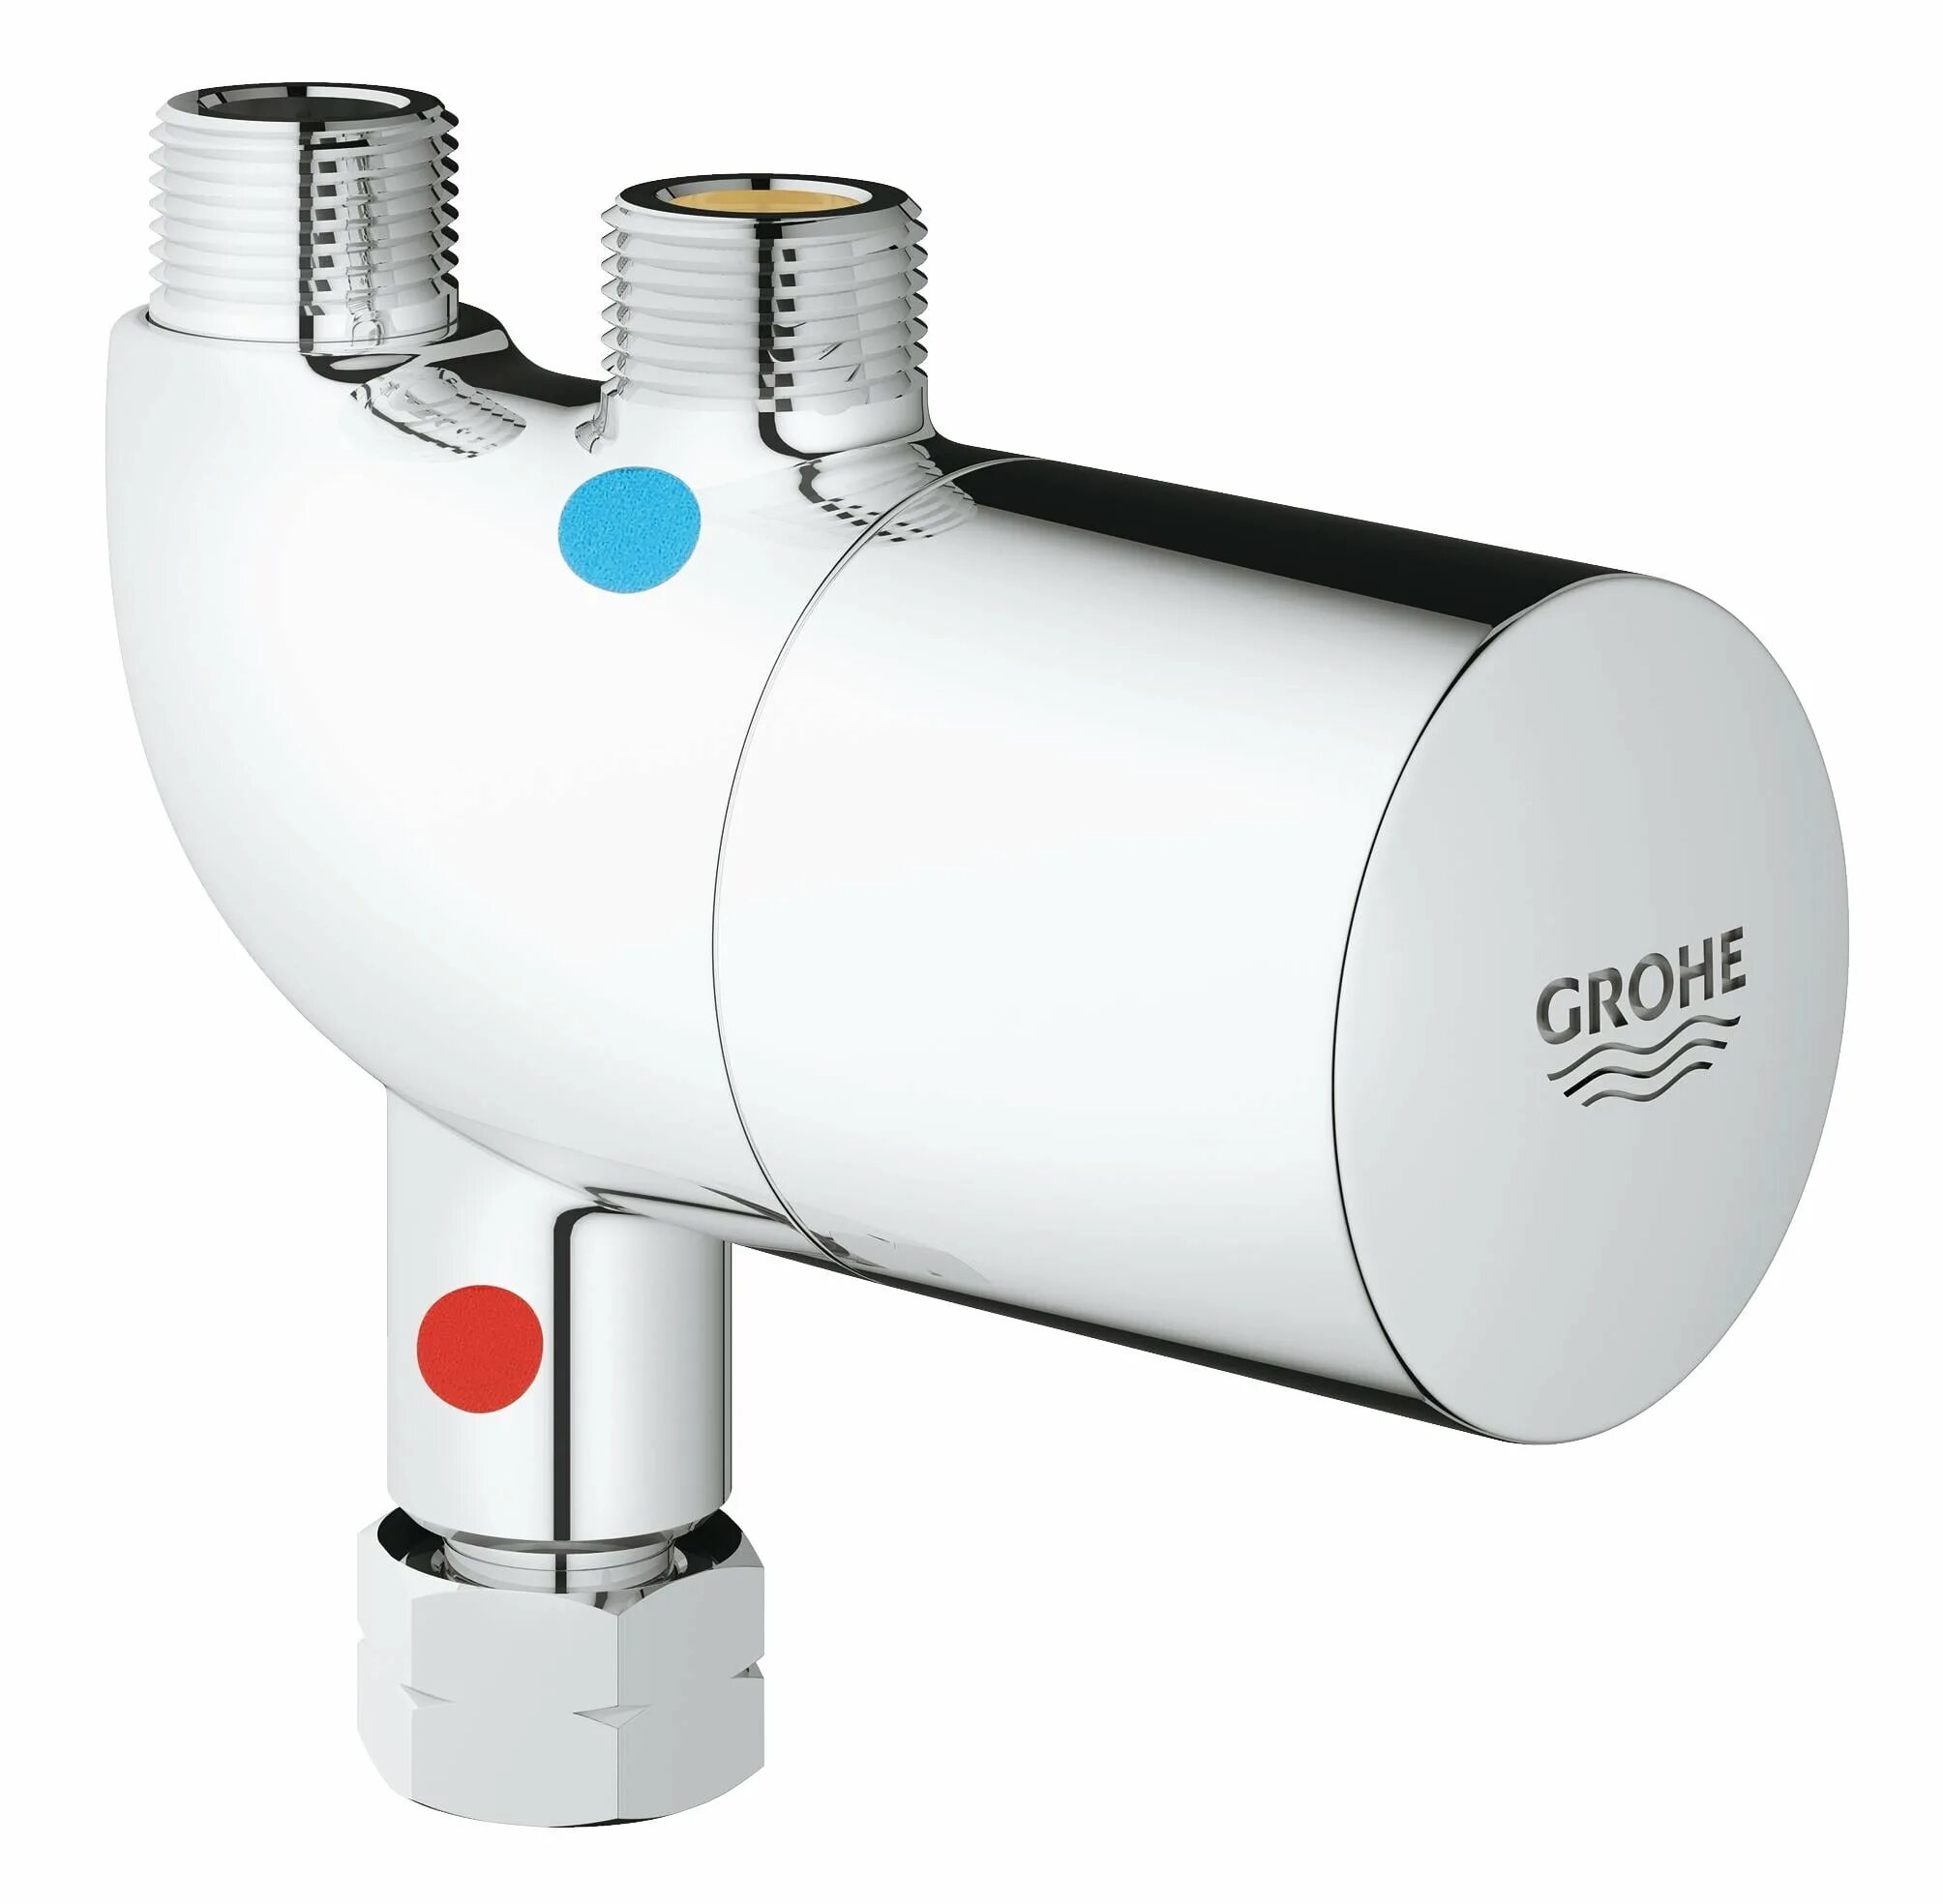 Grohe Grohtherm Micro 34487000. Grohtherm Micro 34487000. 34487000 Grohe. Термостат Grohe 34487000.